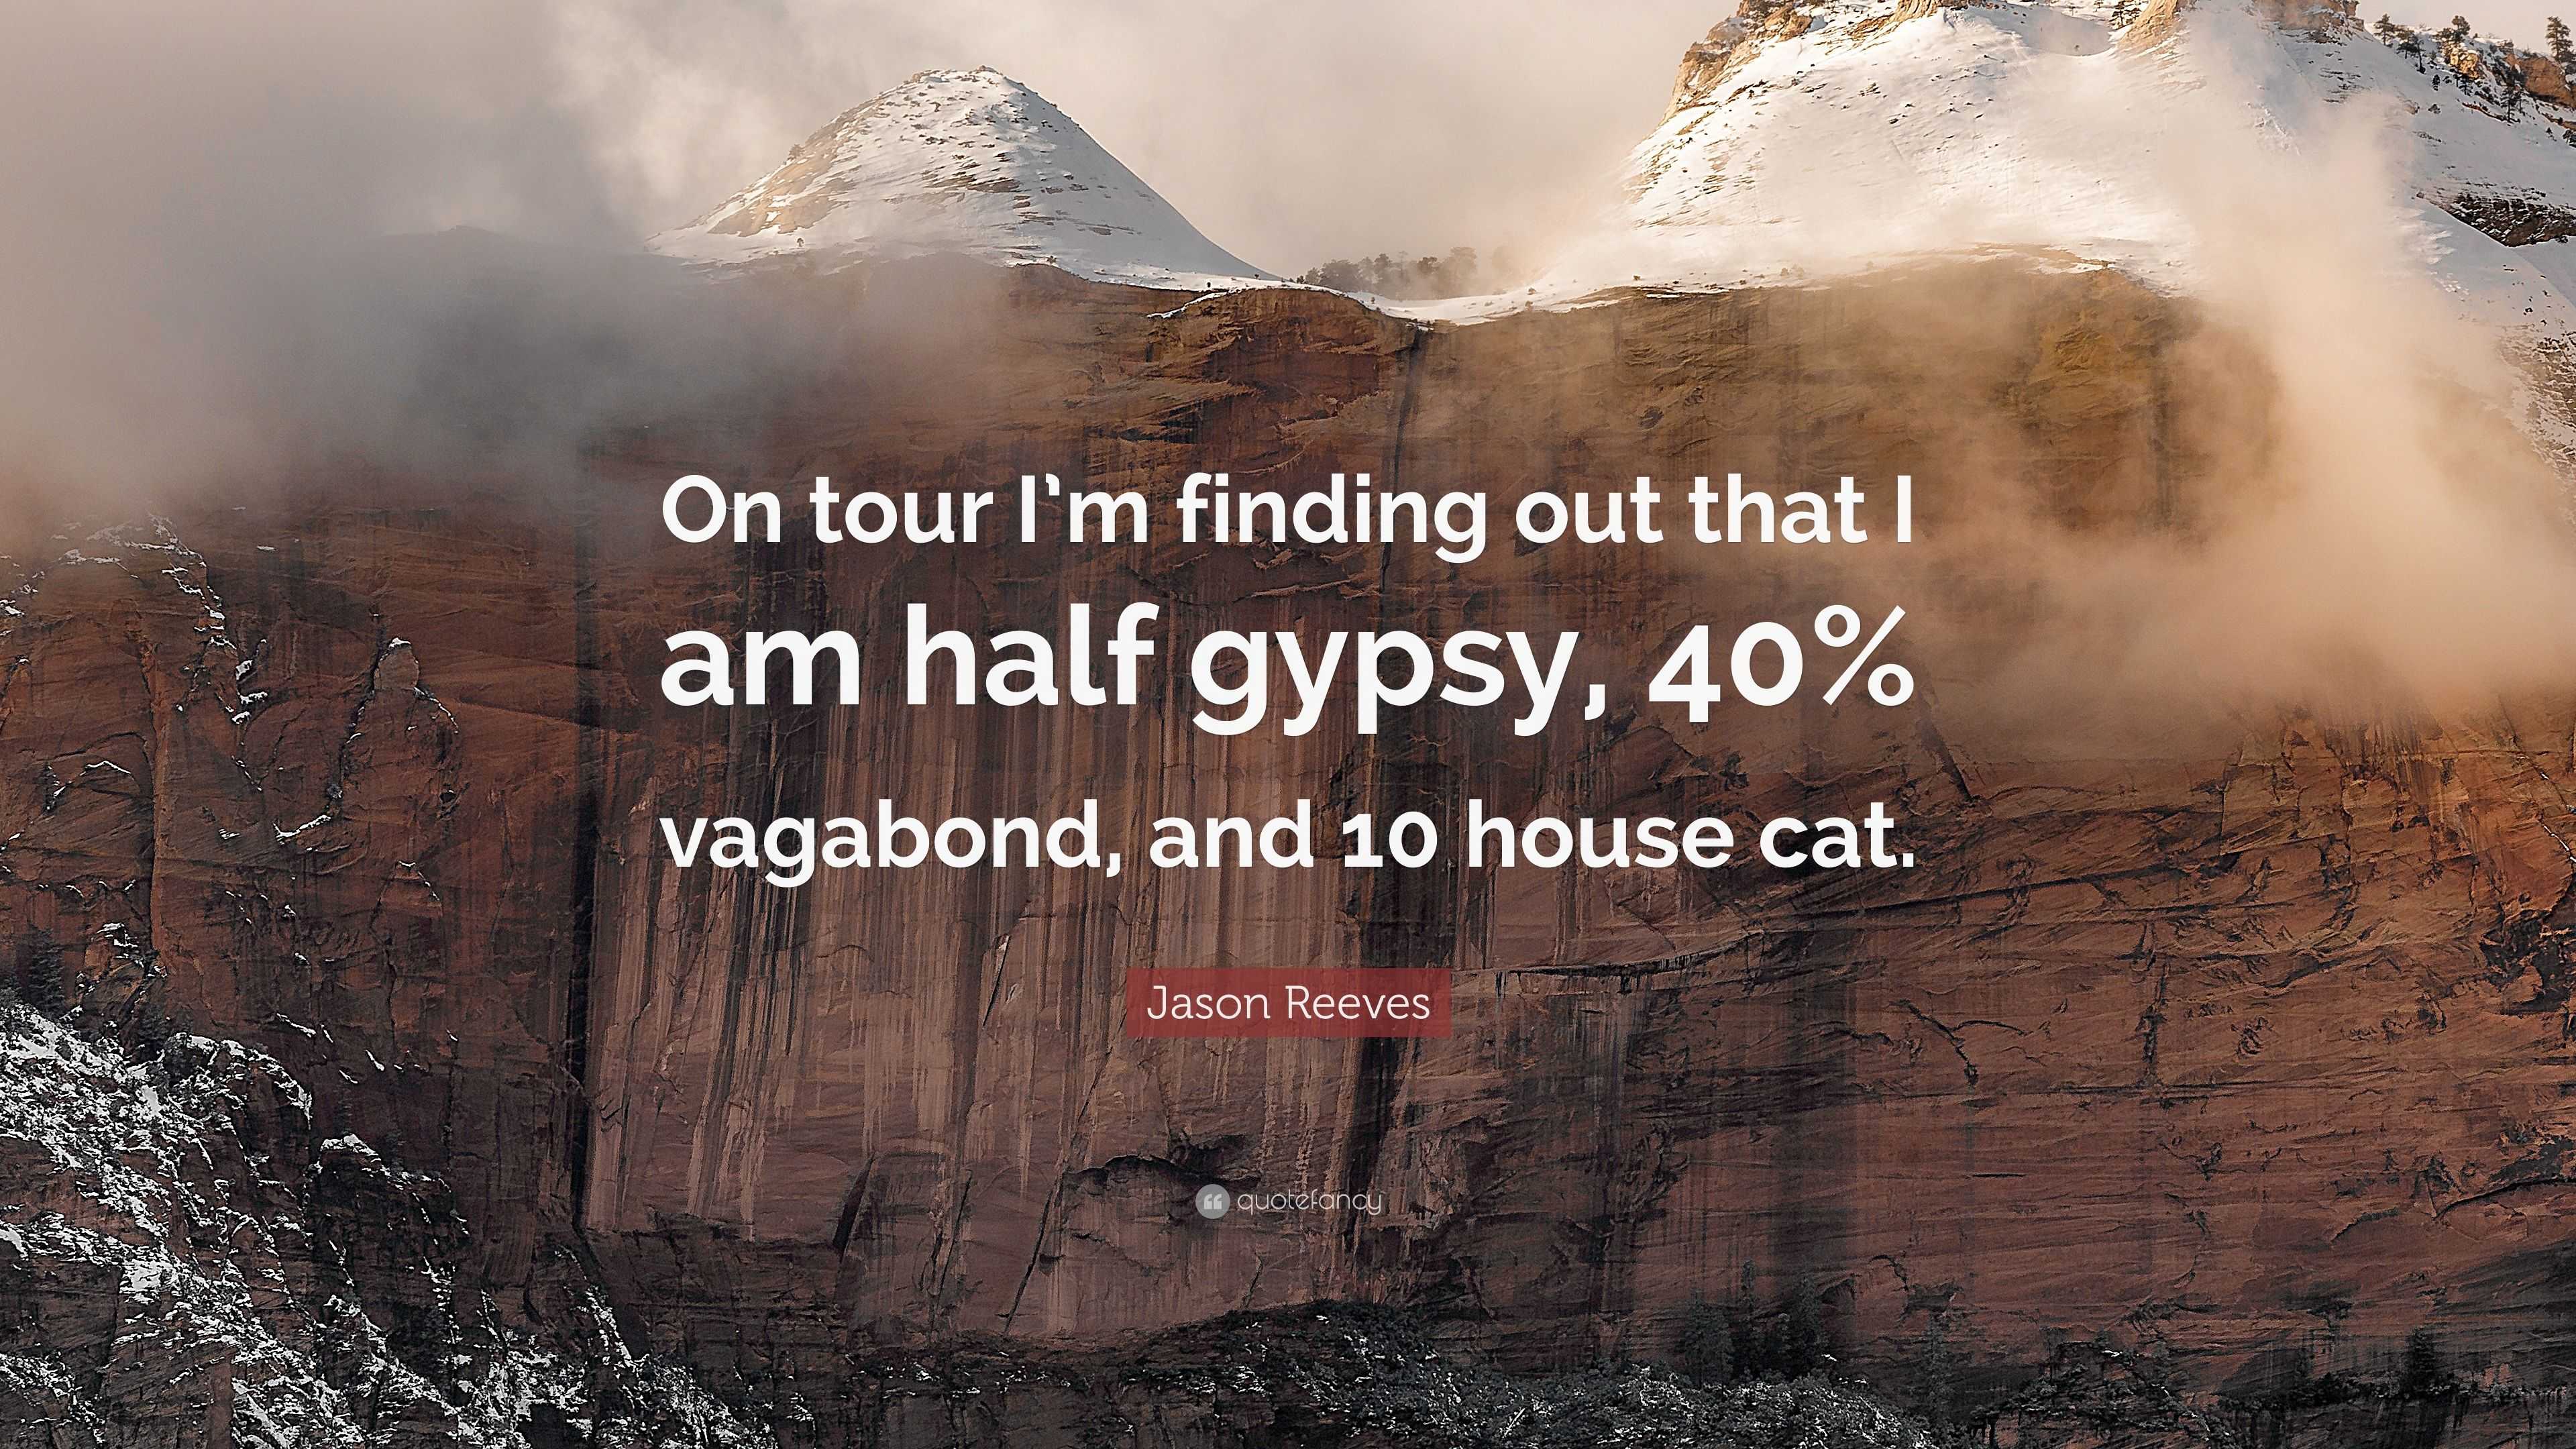 Amorous Strøm Sydøst Jason Reeves Quote: “On tour I'm finding out that I am half gypsy, 40%